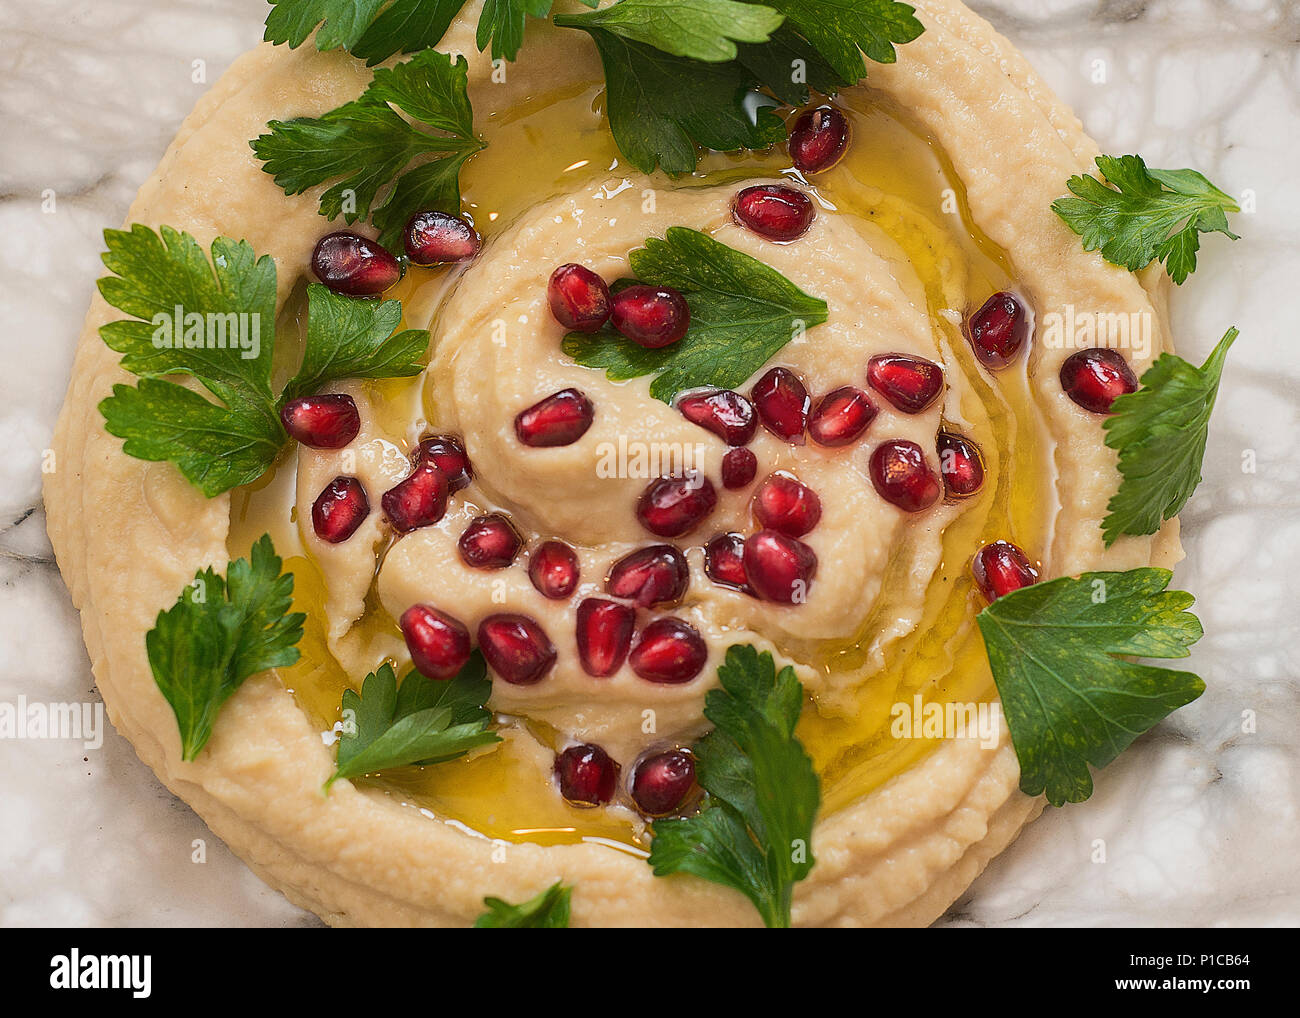 A plate of hummus dip prepared for a holiday celebration. Stock Photo